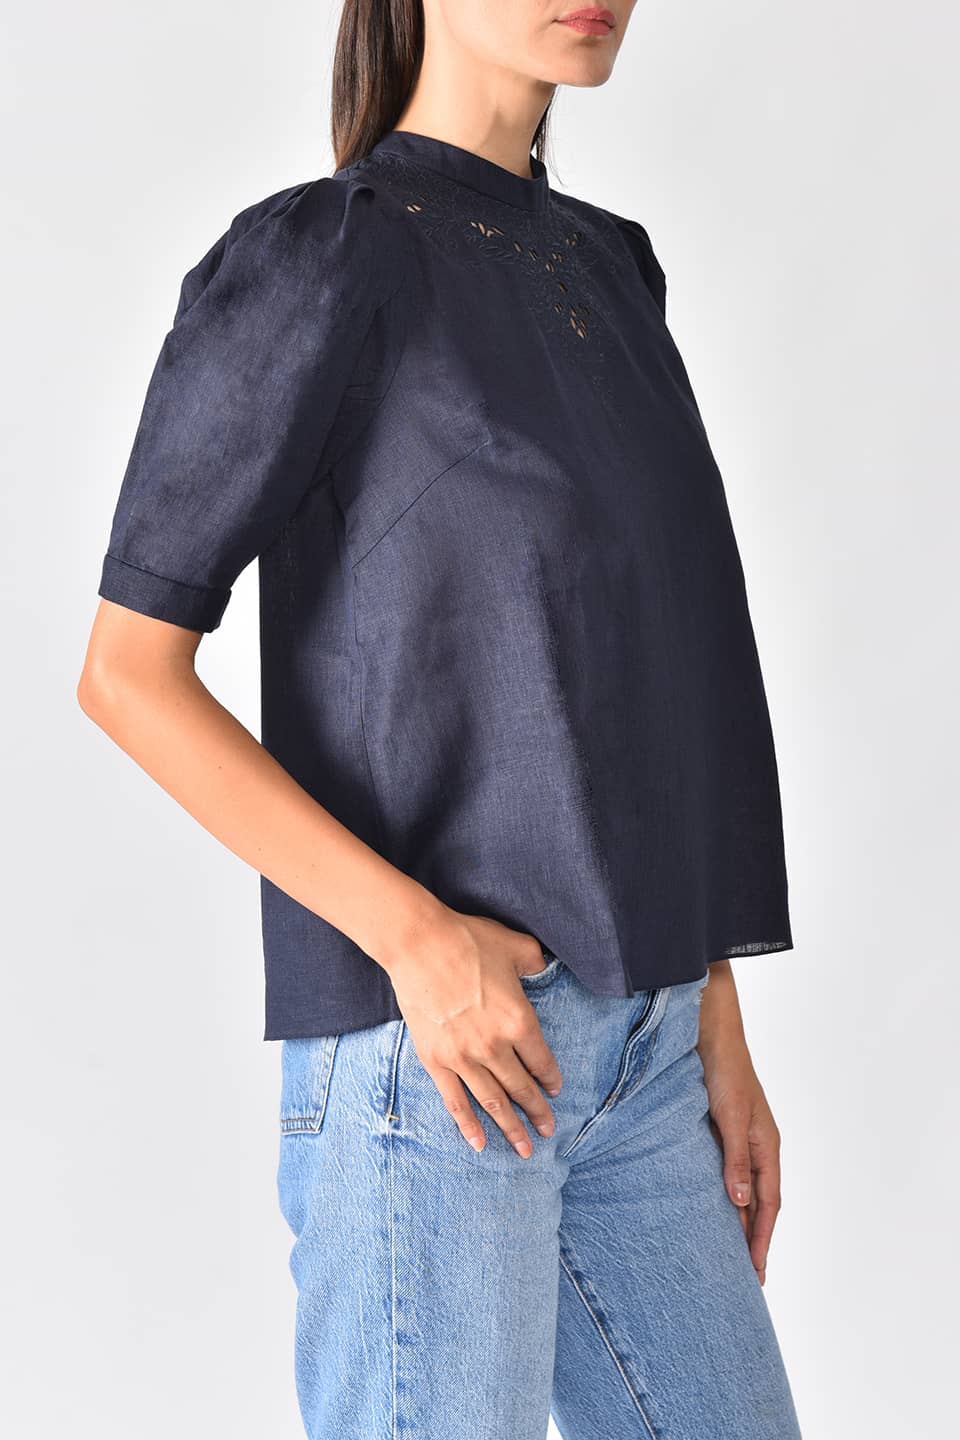 Thumbnail for Product gallery 5, Model wears navy linen top with floral cutout embroidery from stylist Vilshenko, posing from right side